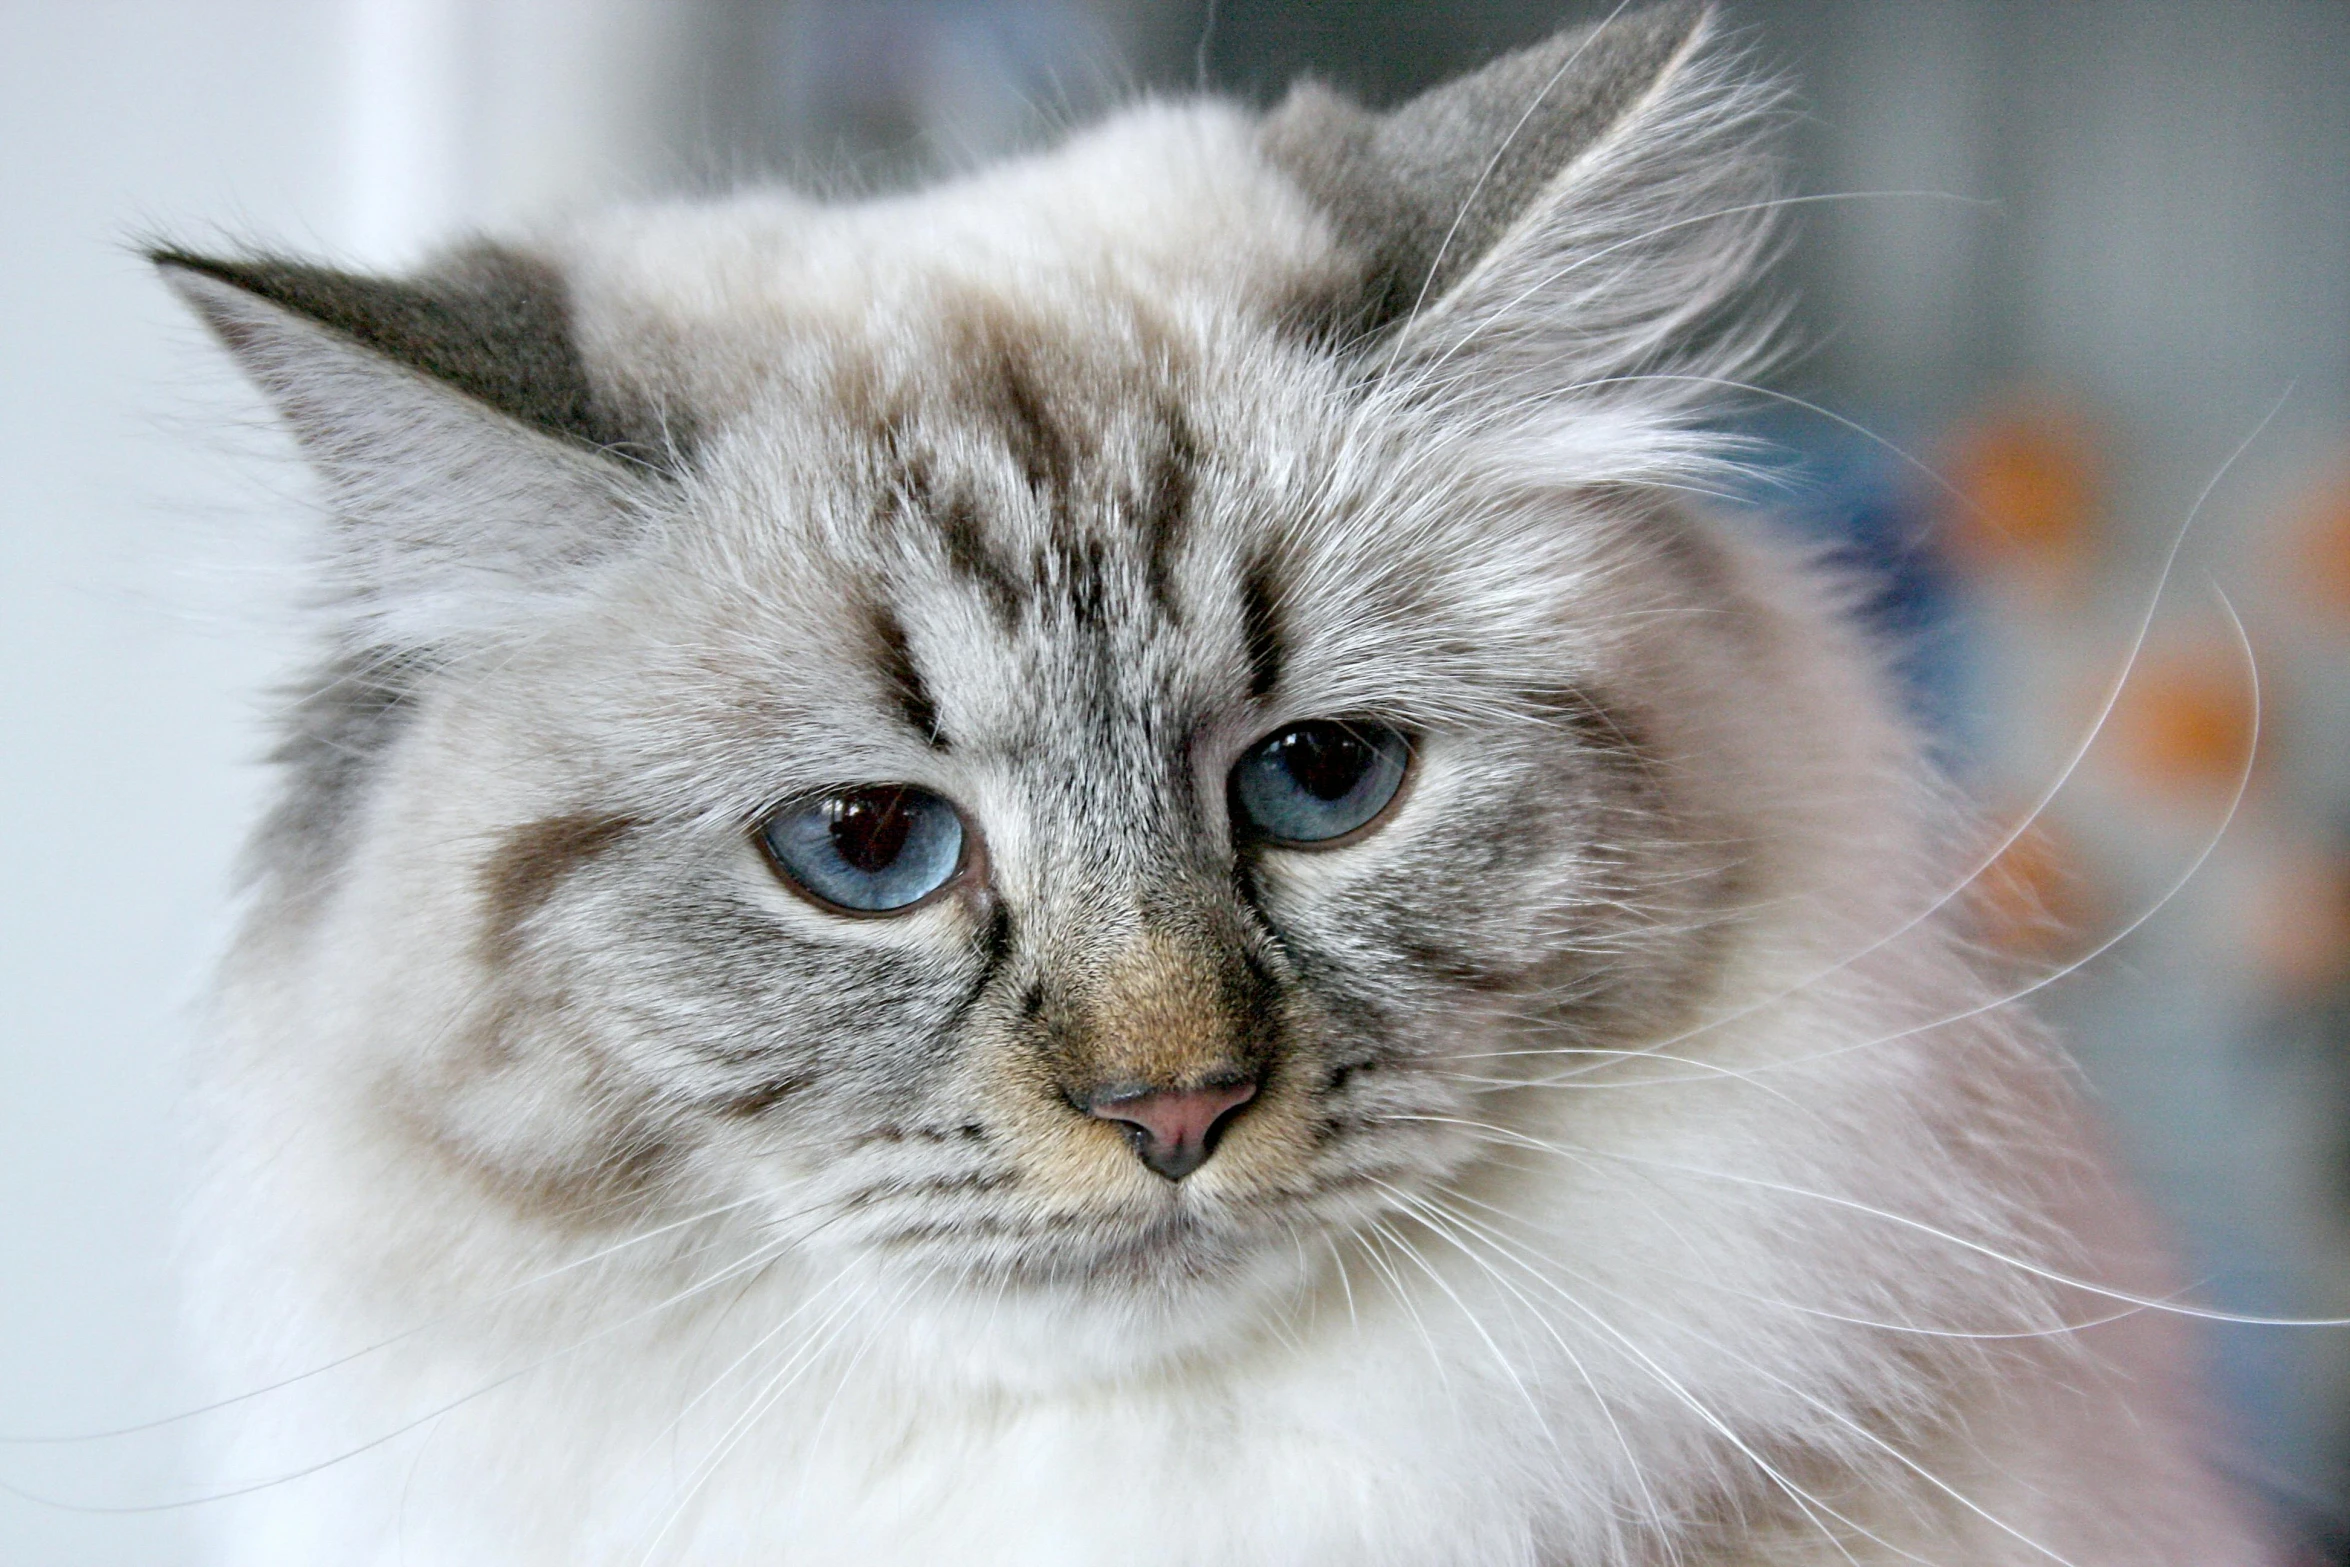 a close up of a cat with blue eyes, fluffy hair, looking confused, short light grey whiskers, professional photo